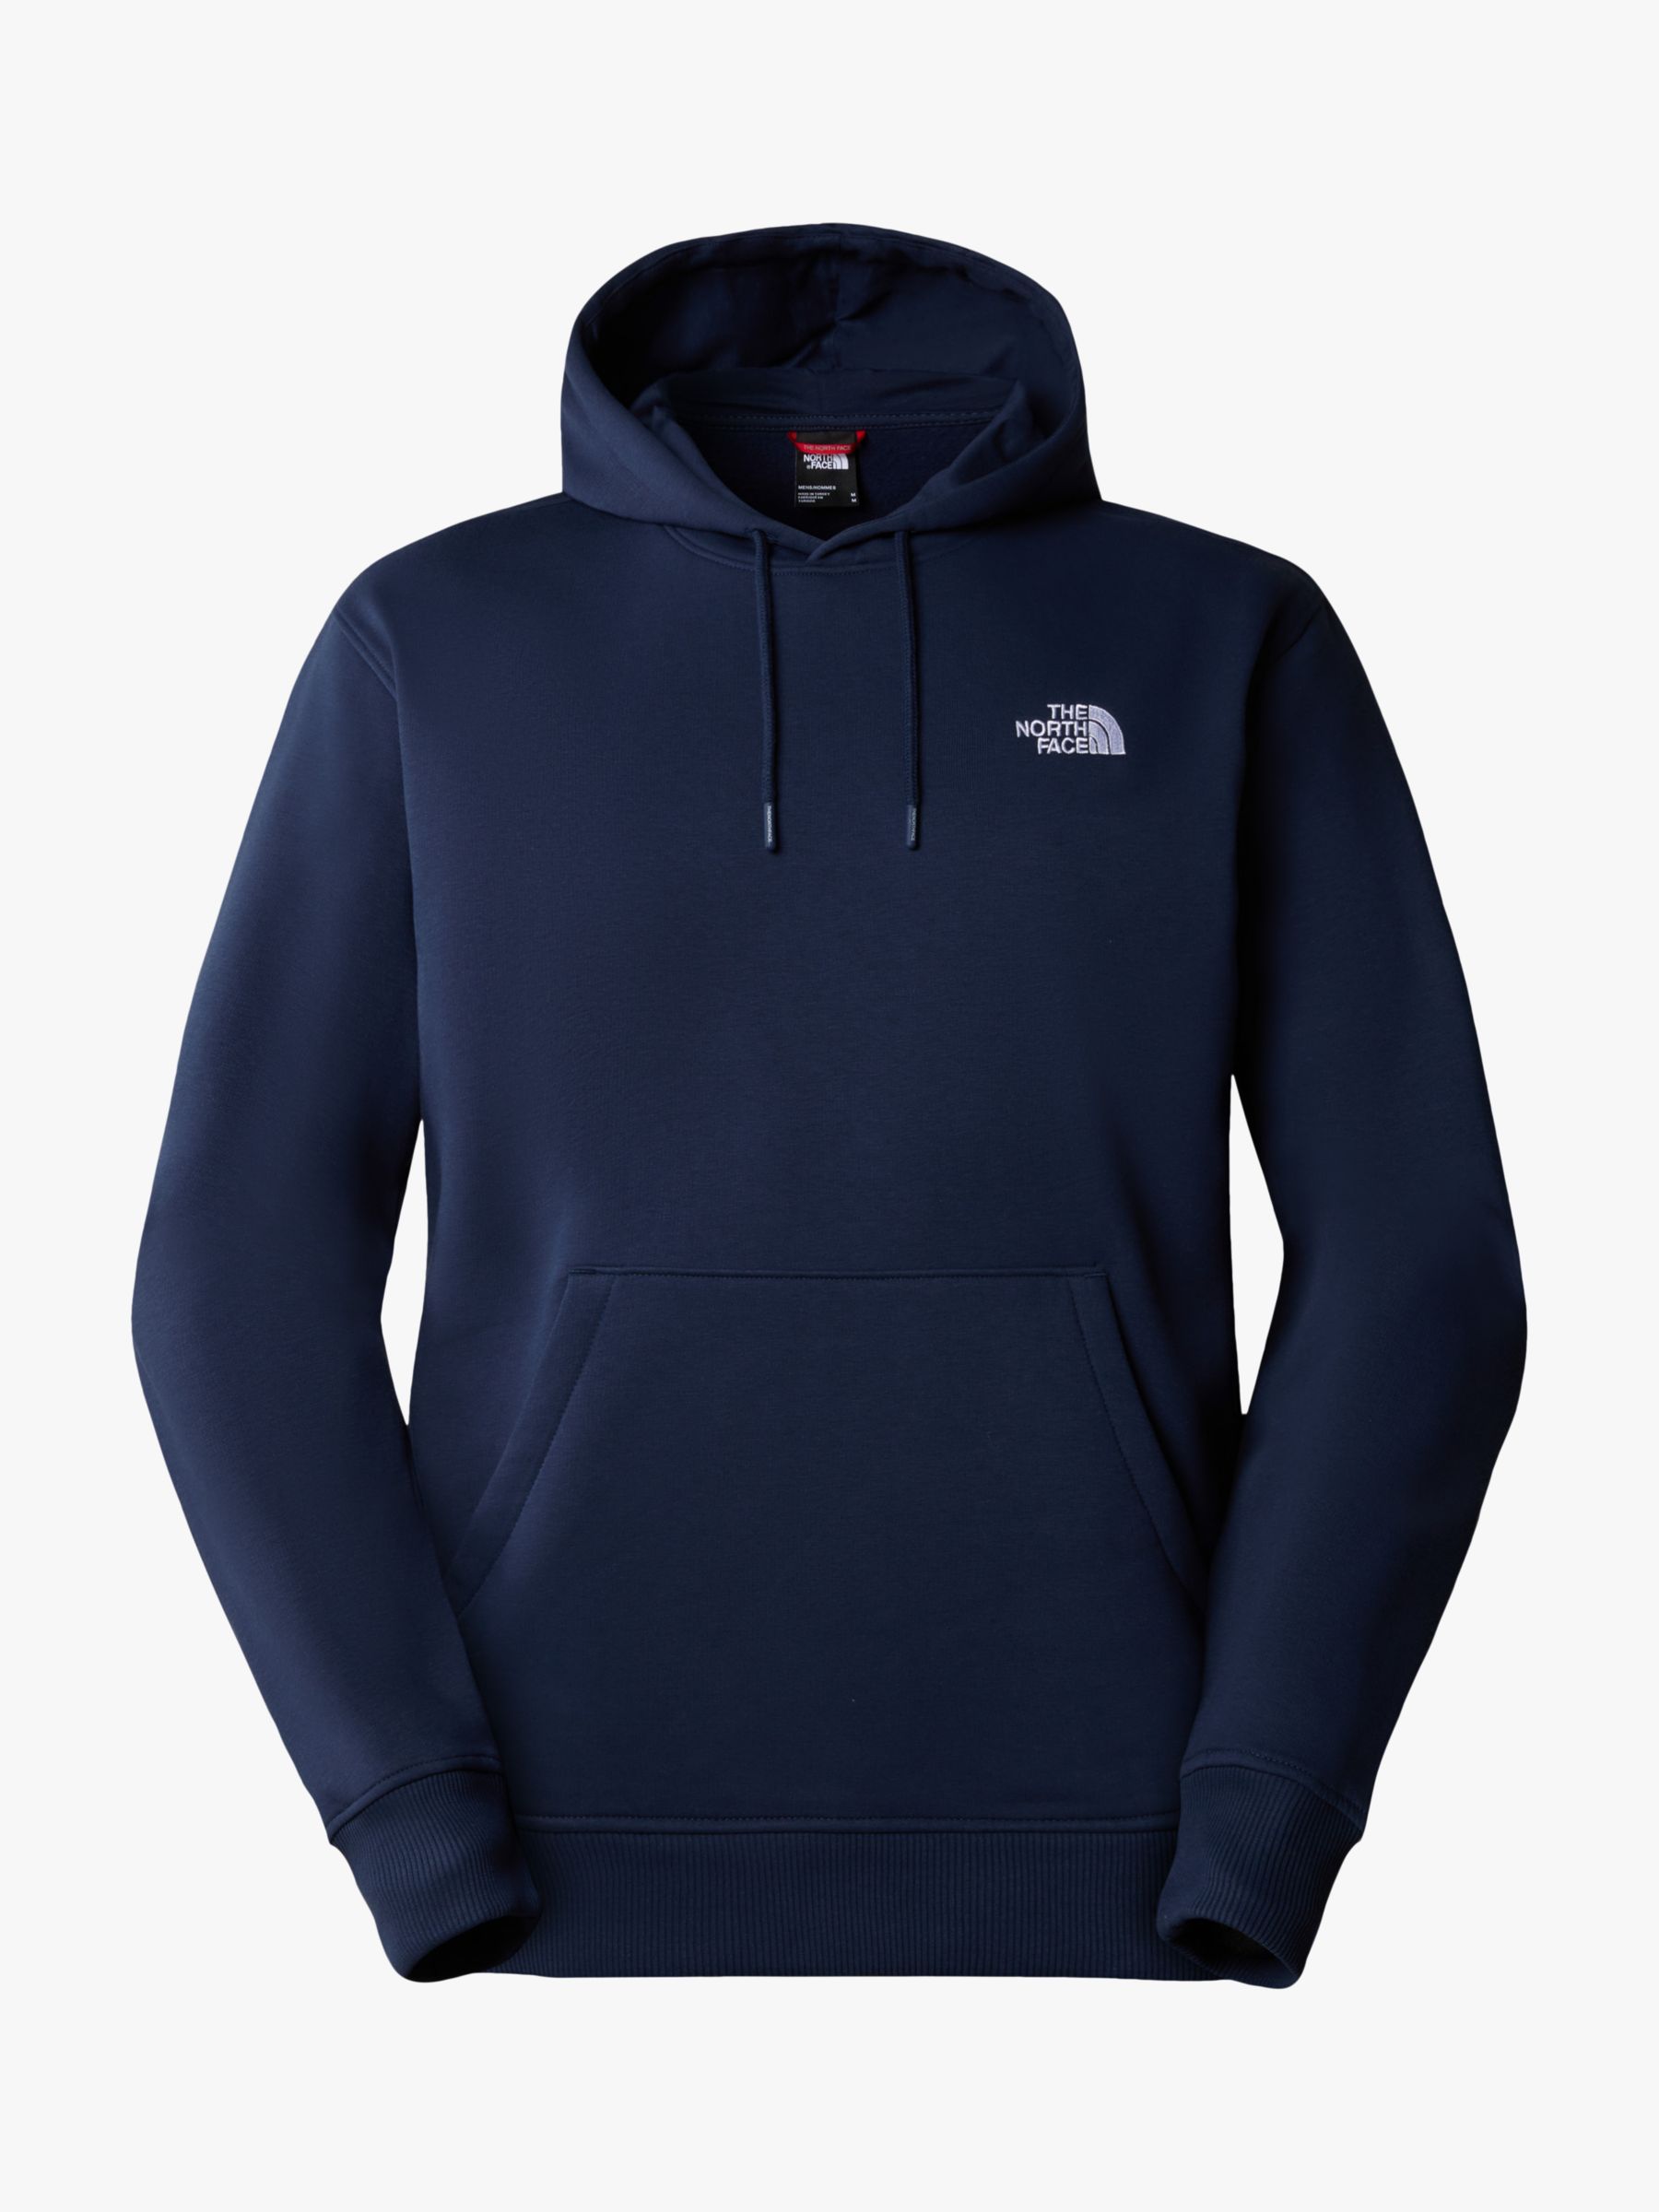 The North Face Essential Hoodie, Navy, S